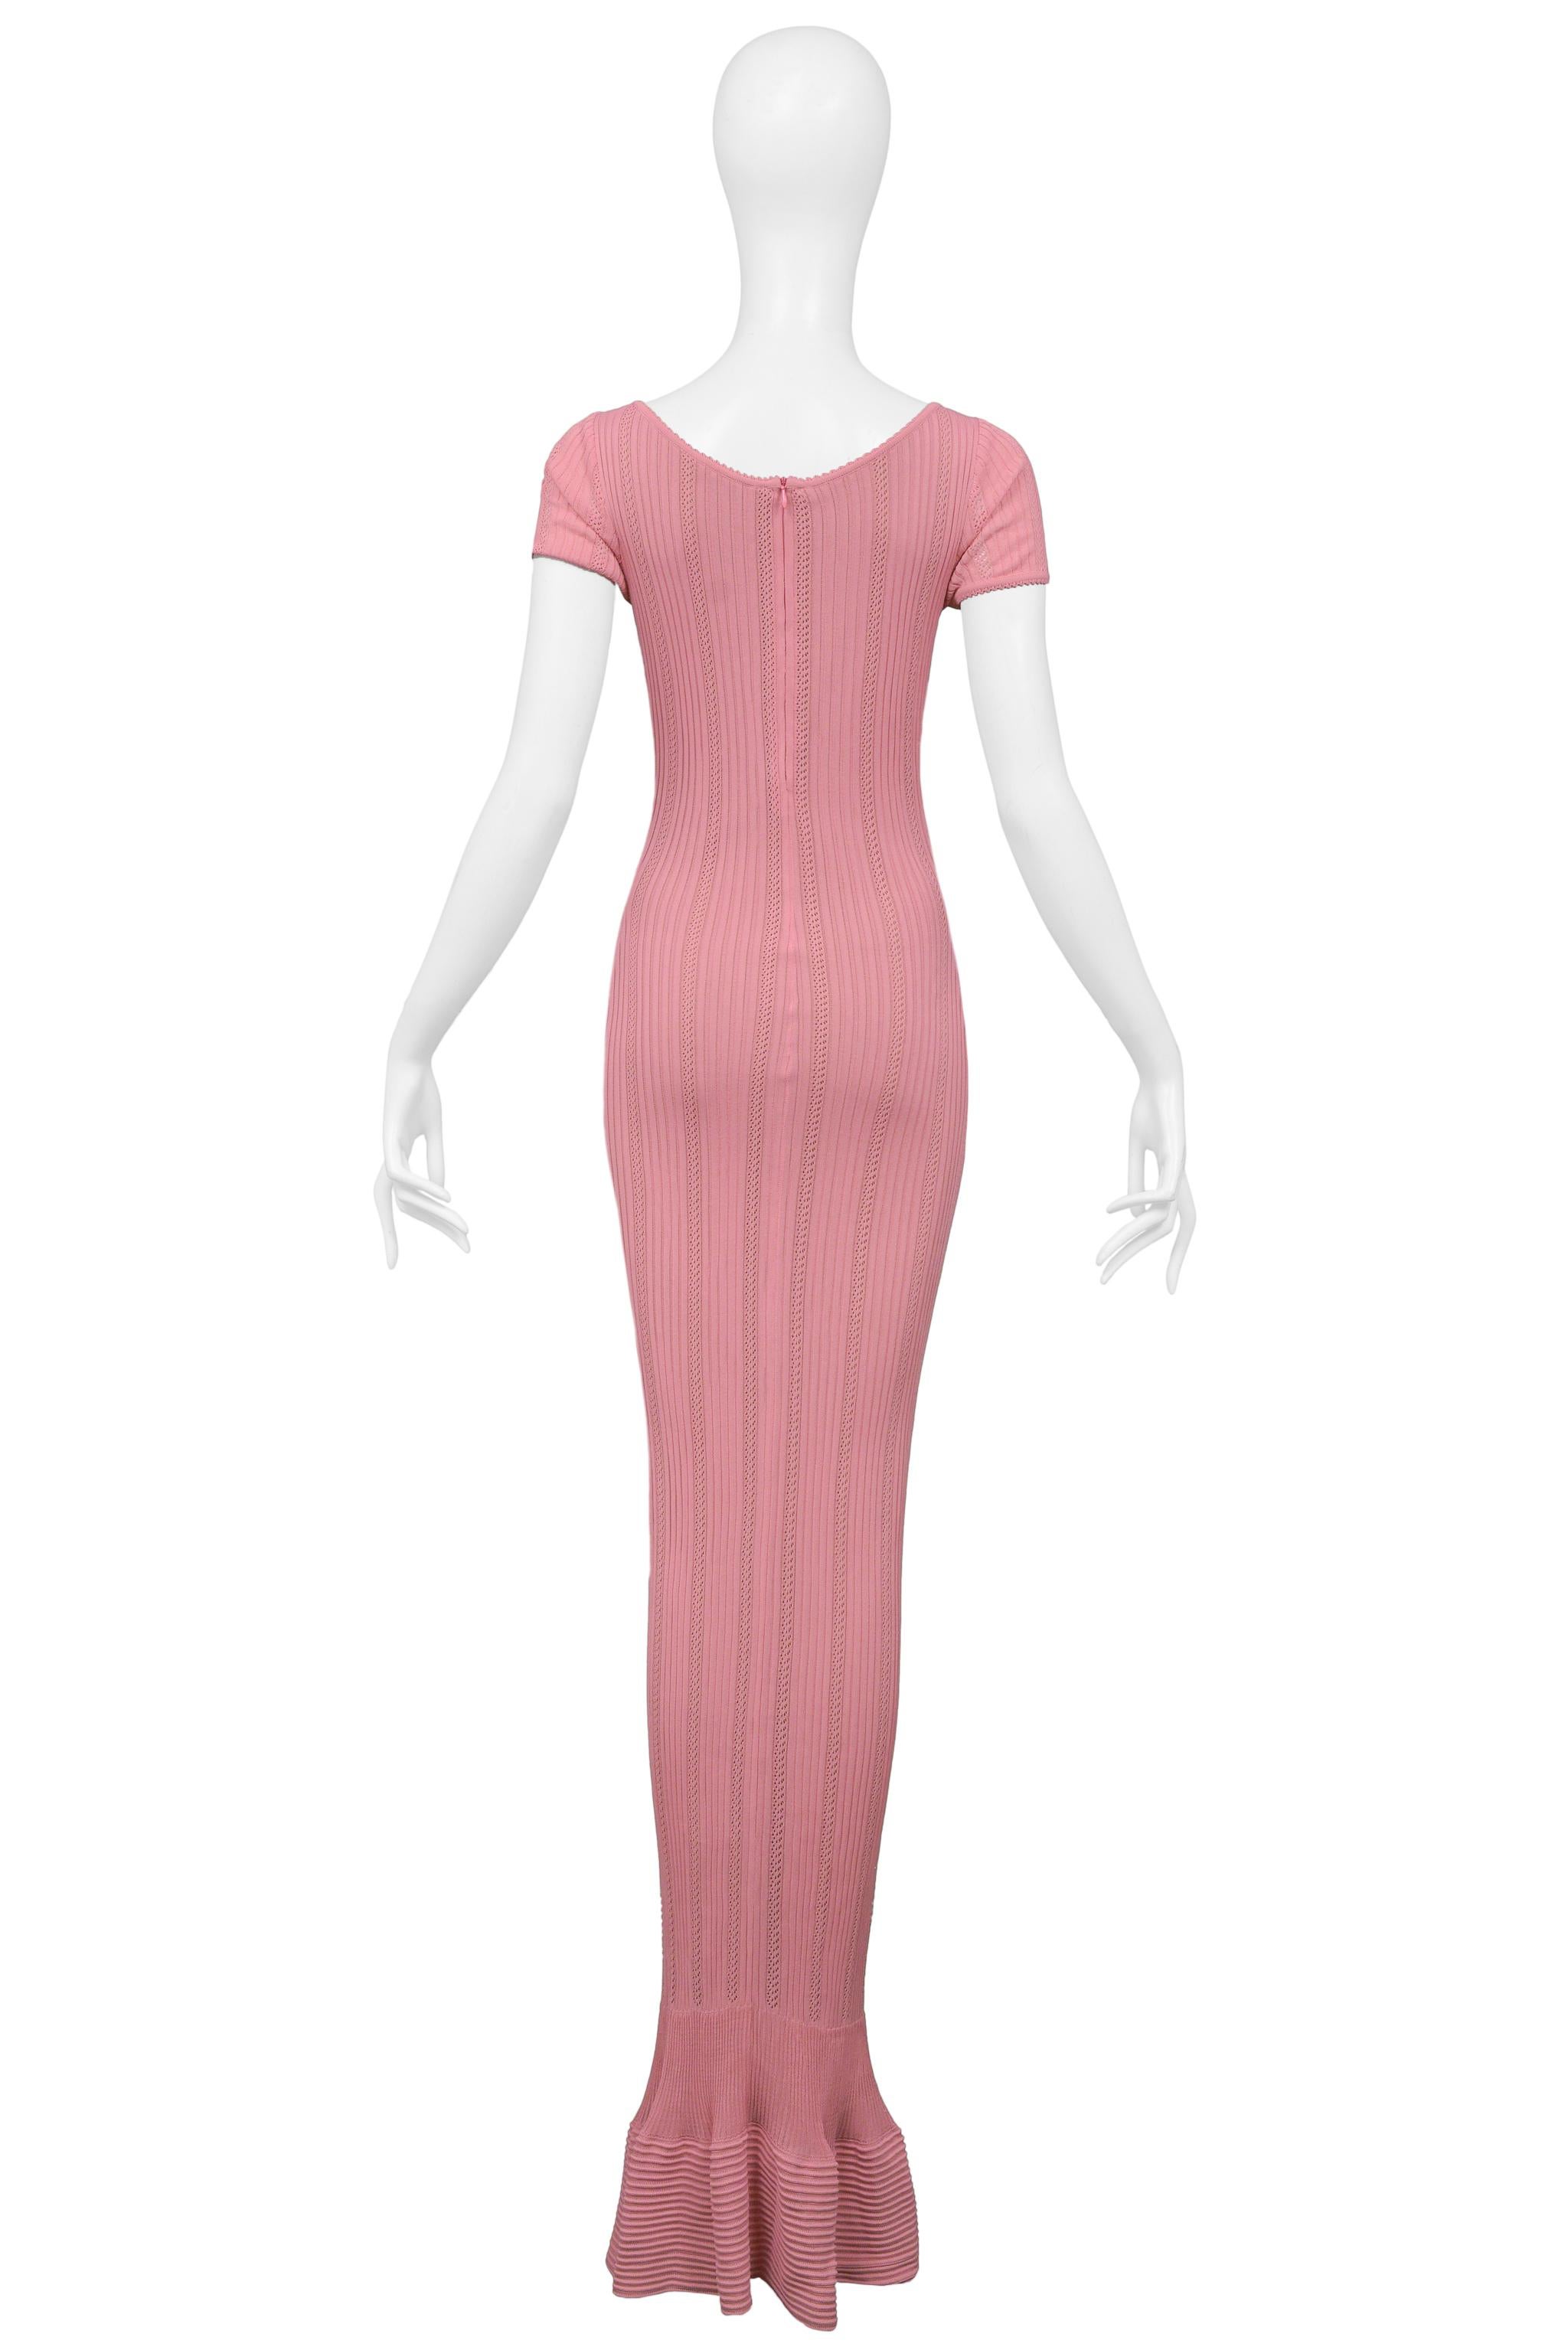 Alaia Pink Knit Bodycon Mermaid Dress SS 1996 For Sale 2